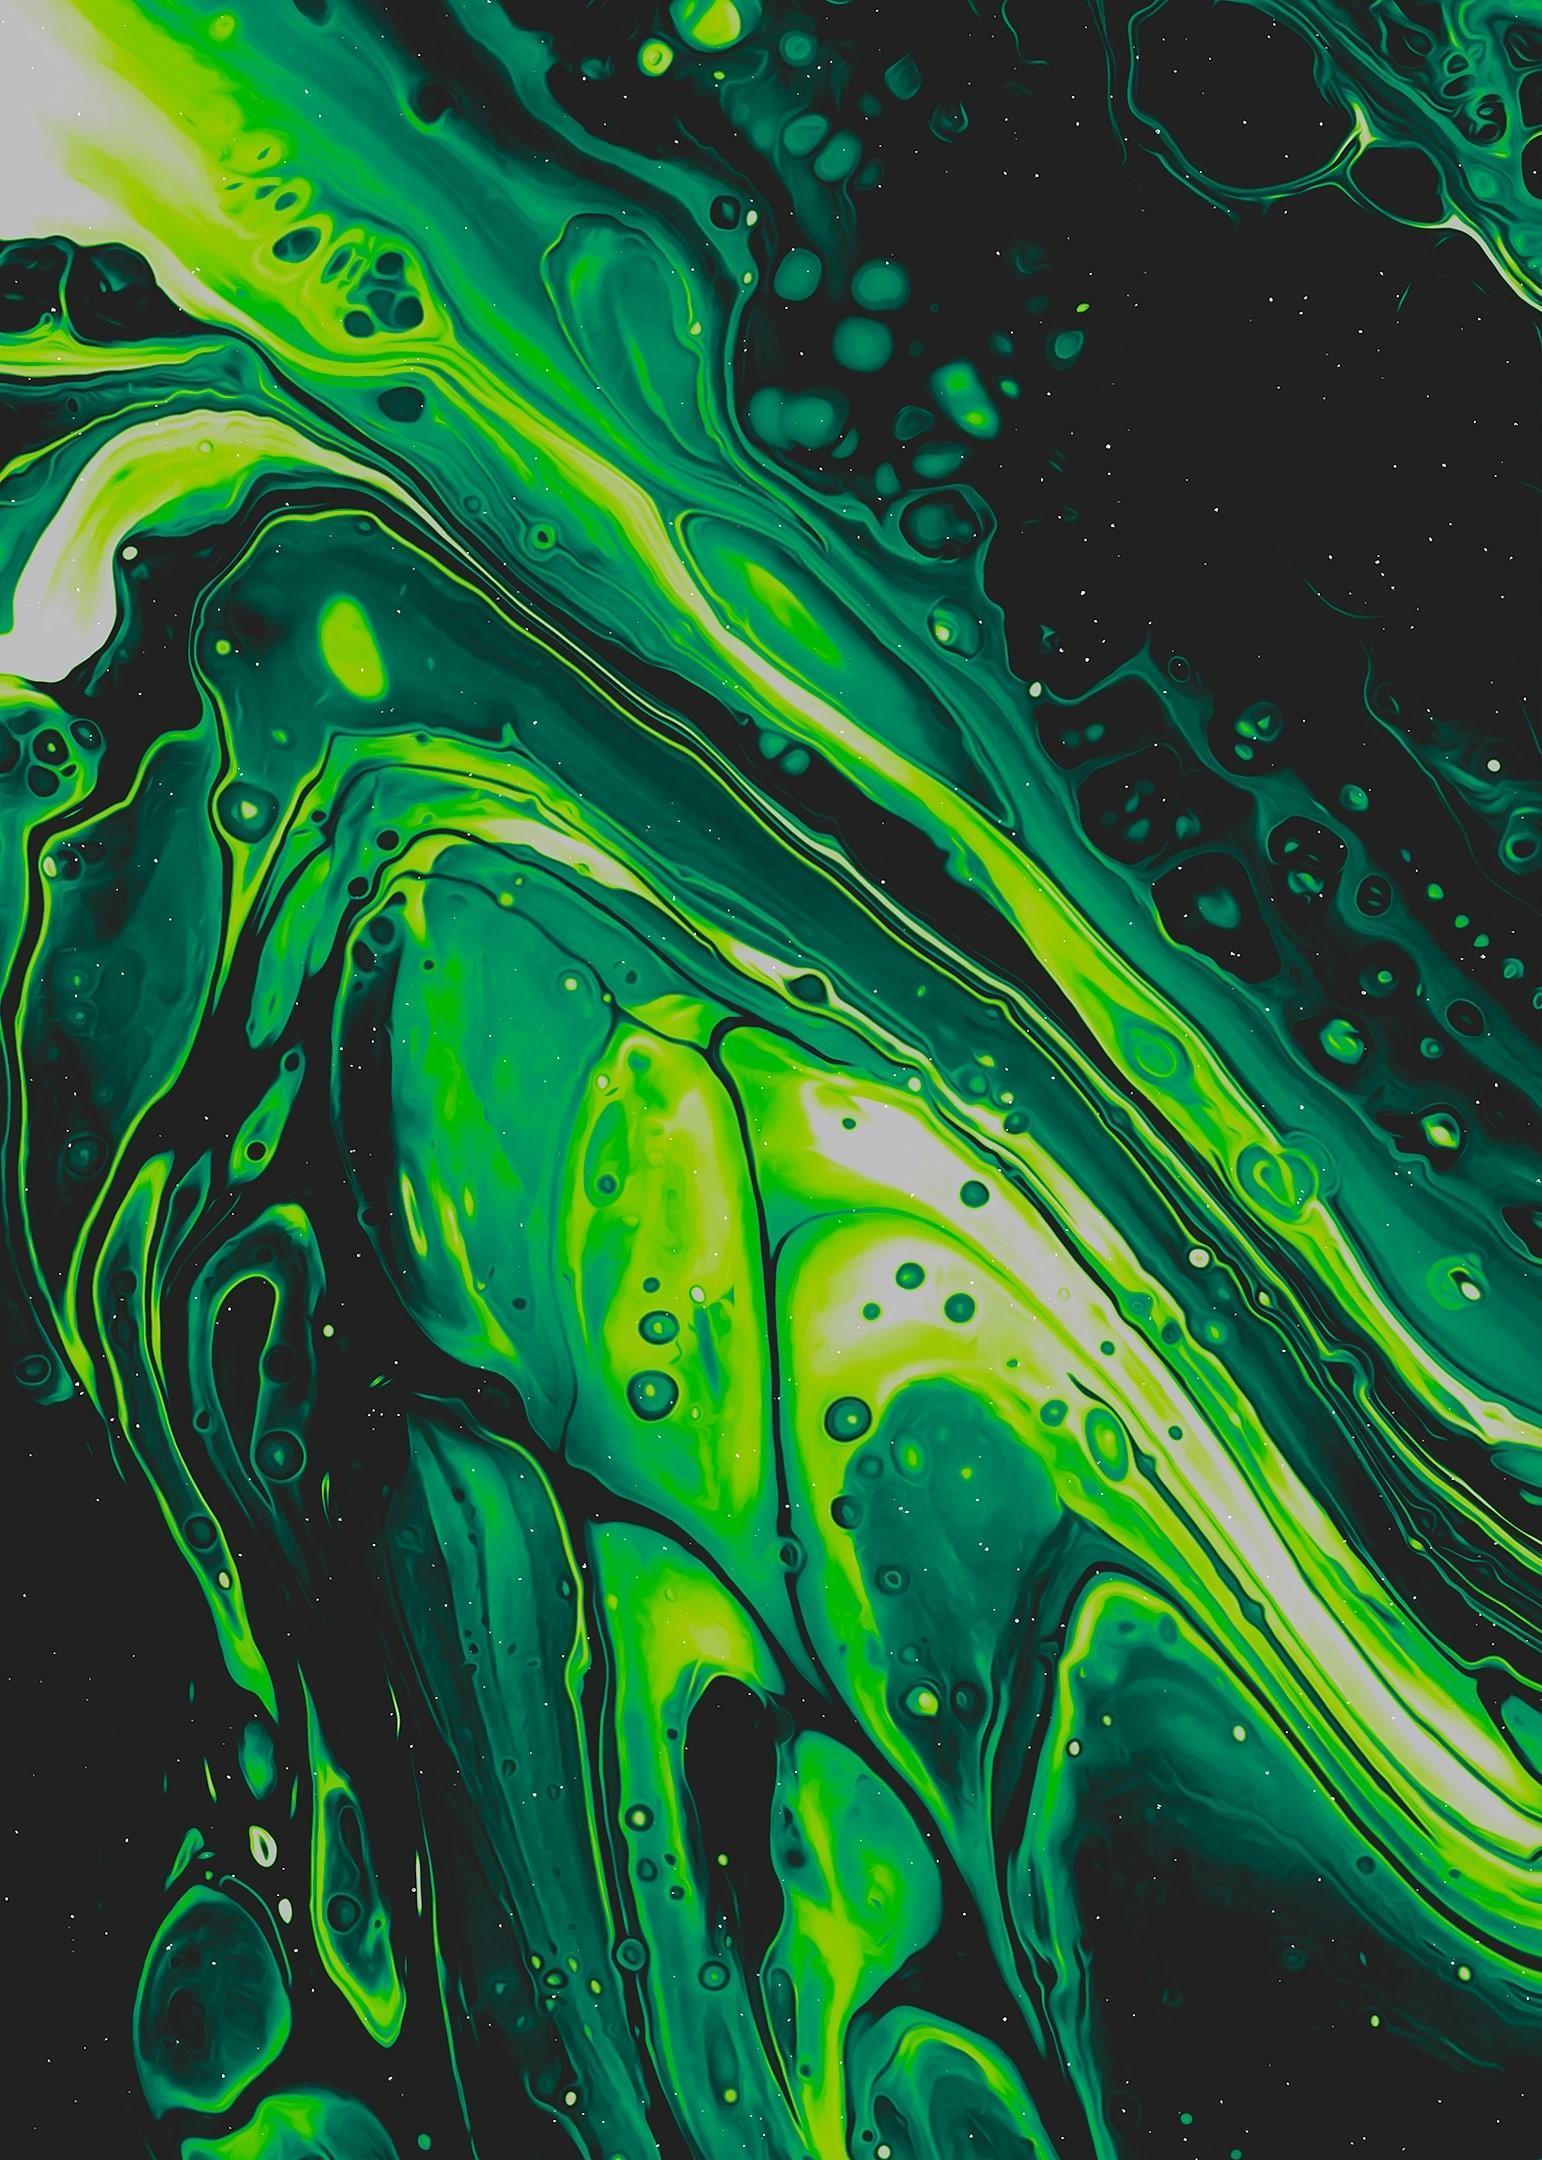 HD wallpaper, Trippy, Abstract, Psychedelic, Green